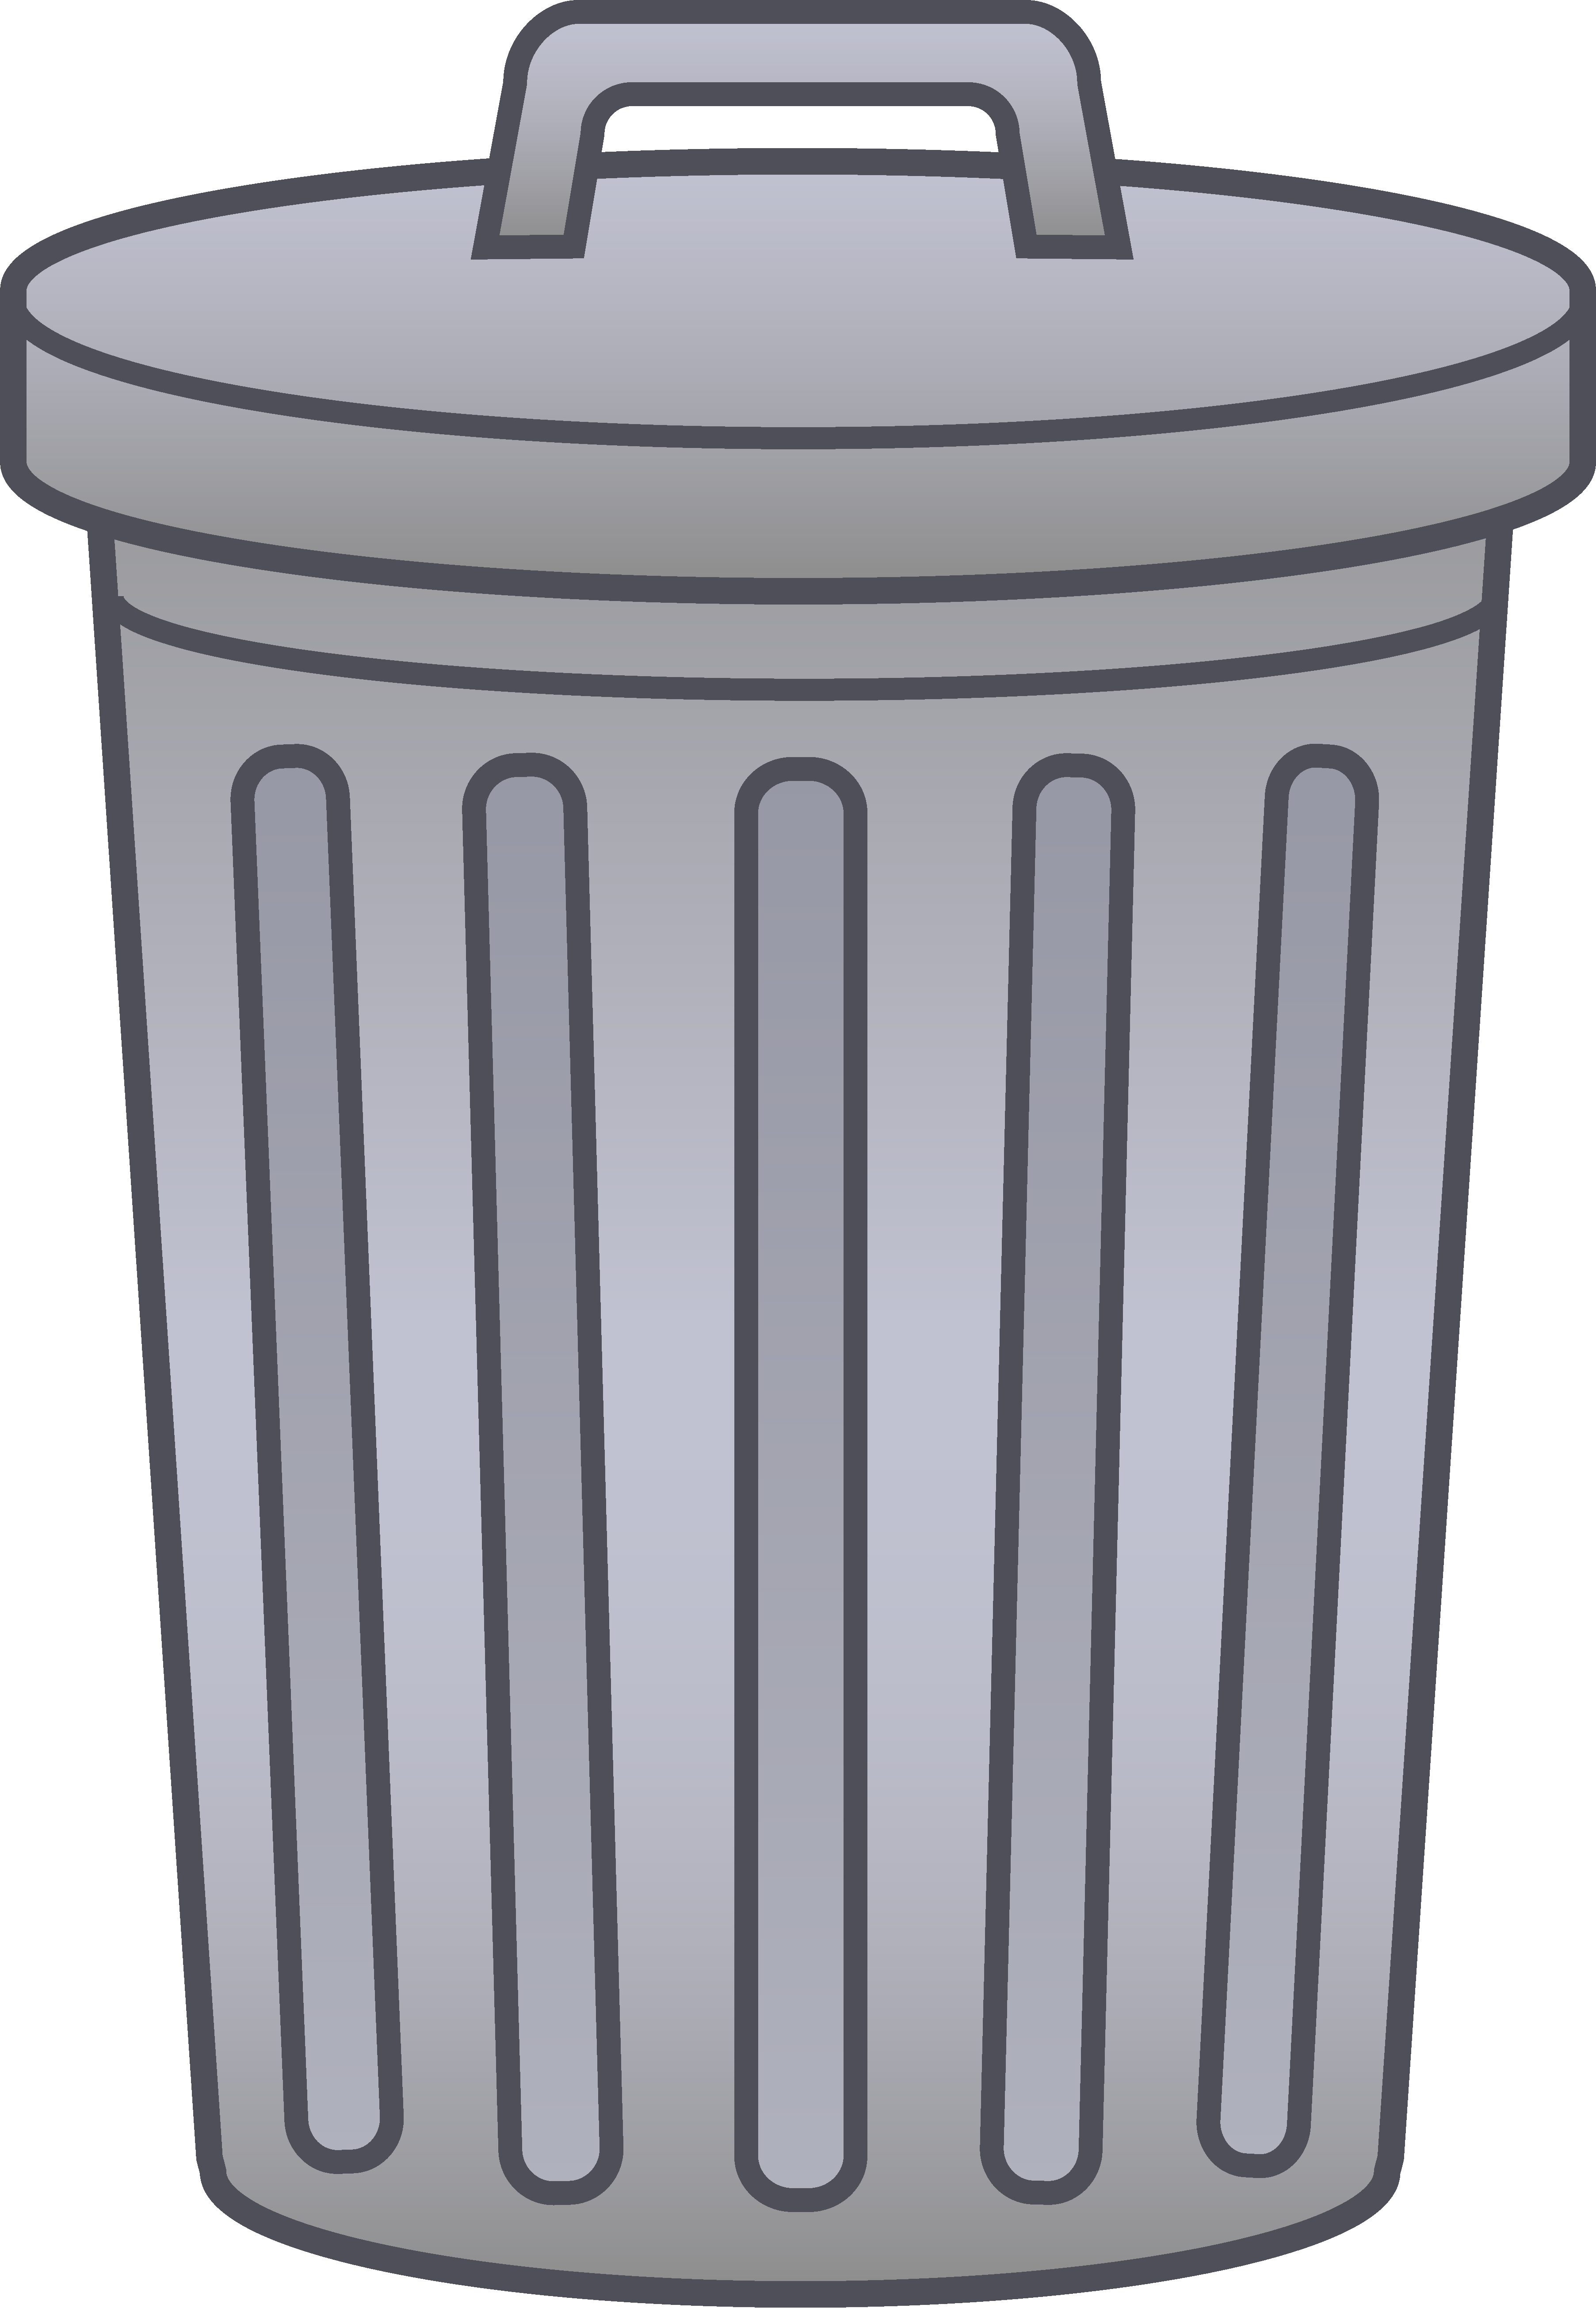 Pictures Of Garbage Cans - Cliparts.co